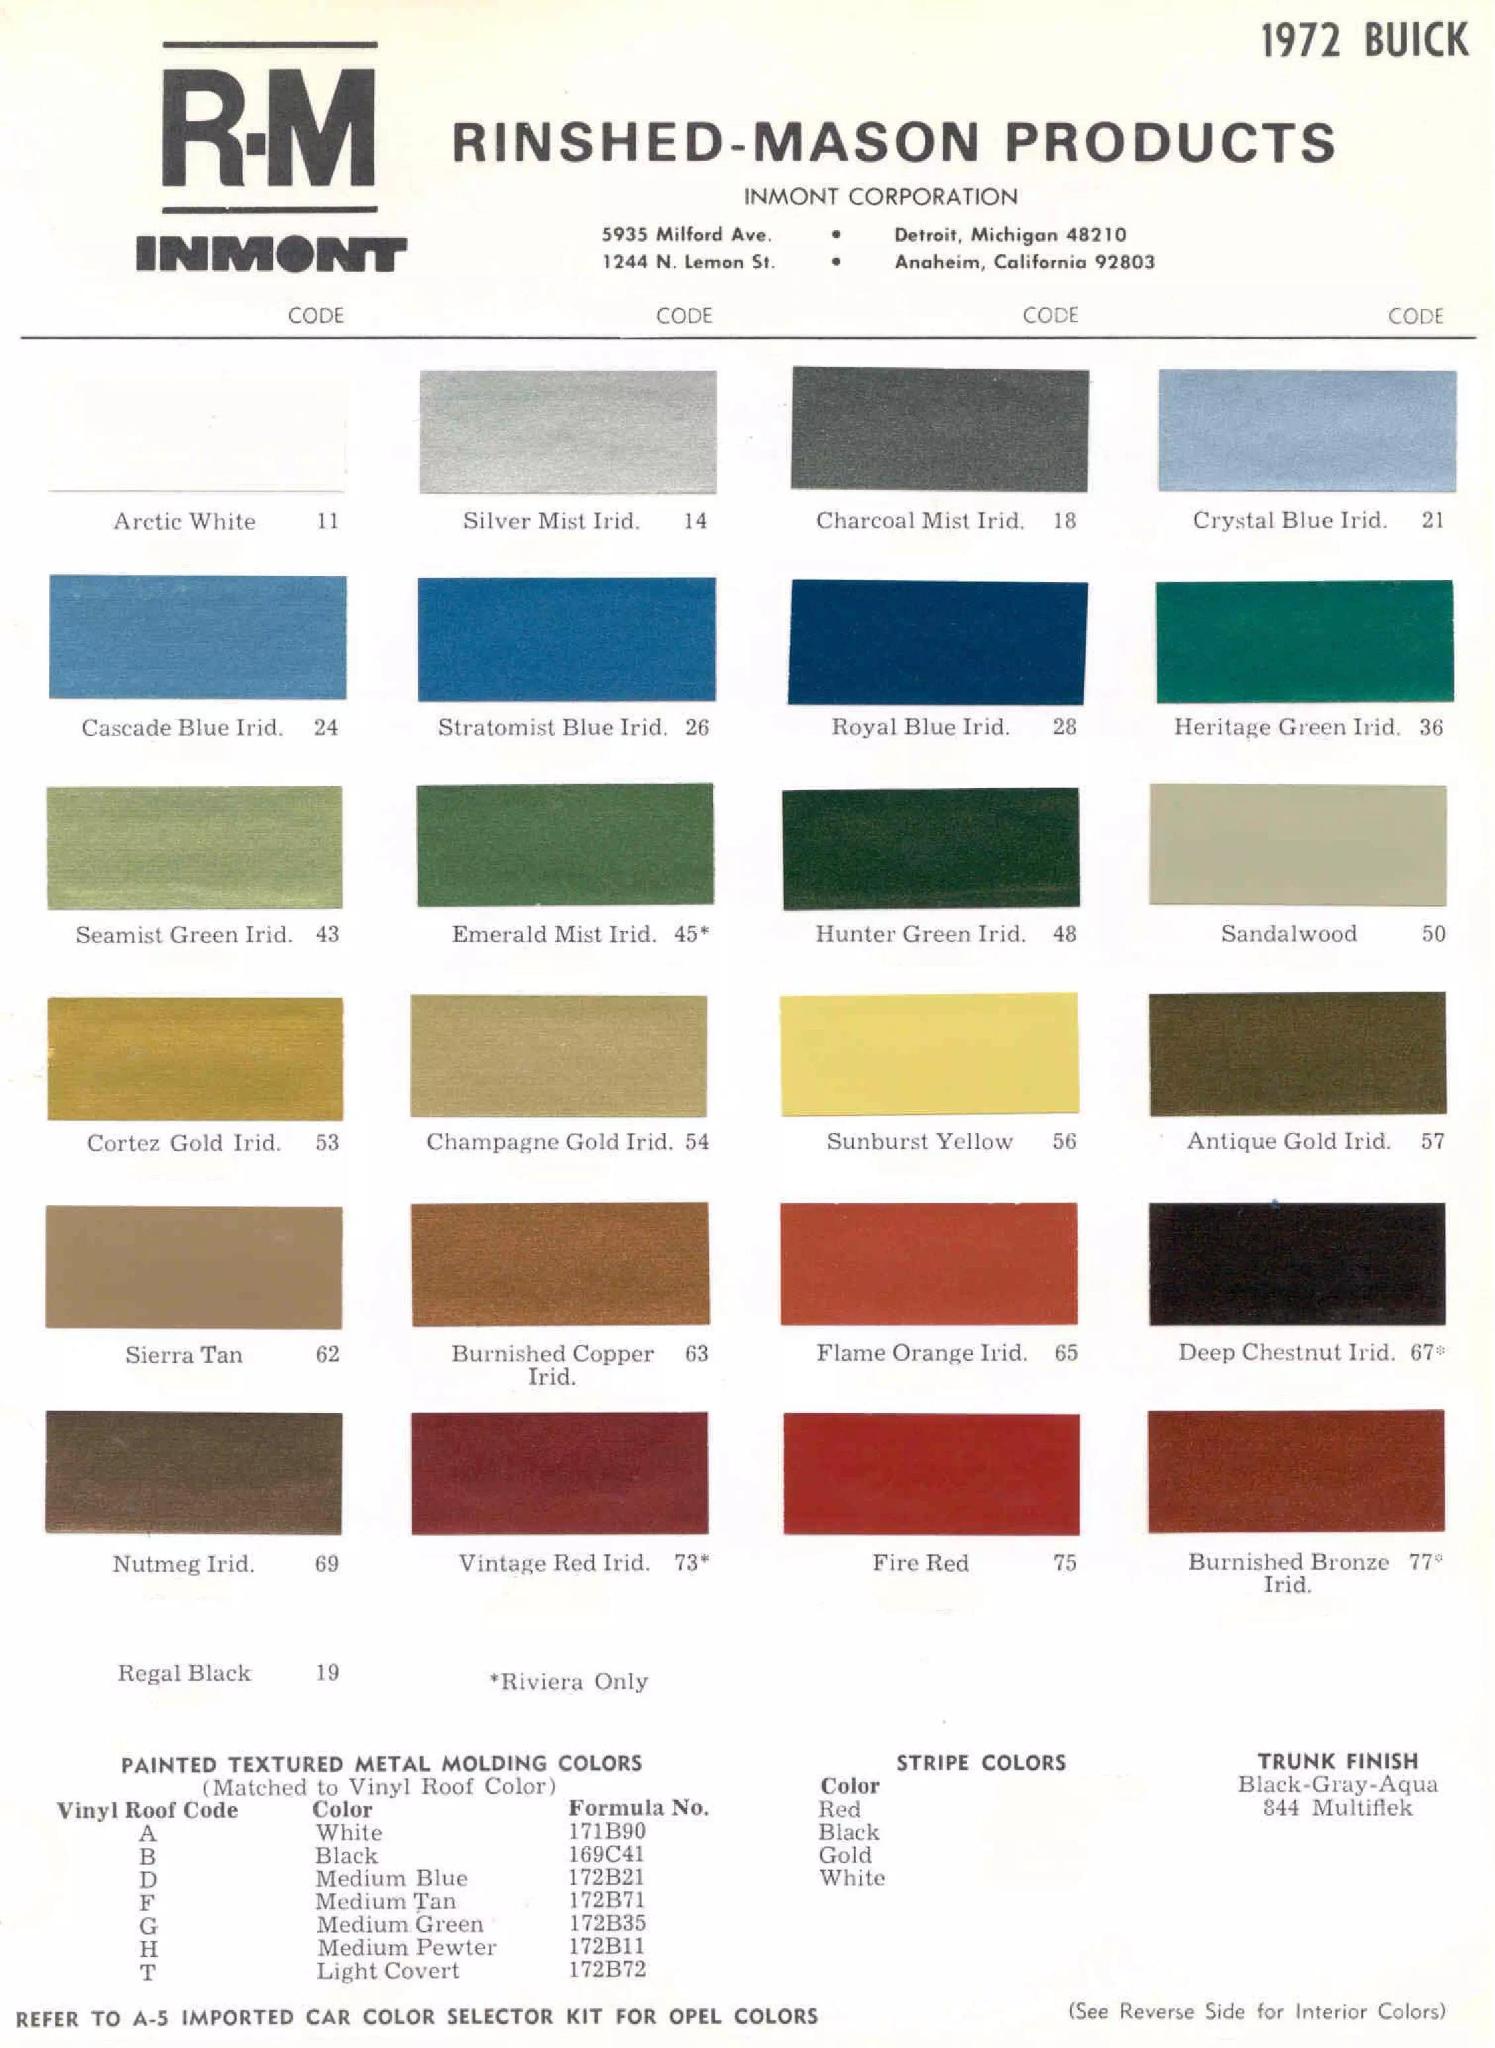 Buick color chart that contains color codes and paint swatches for the exterior color of a Buick vehicle.